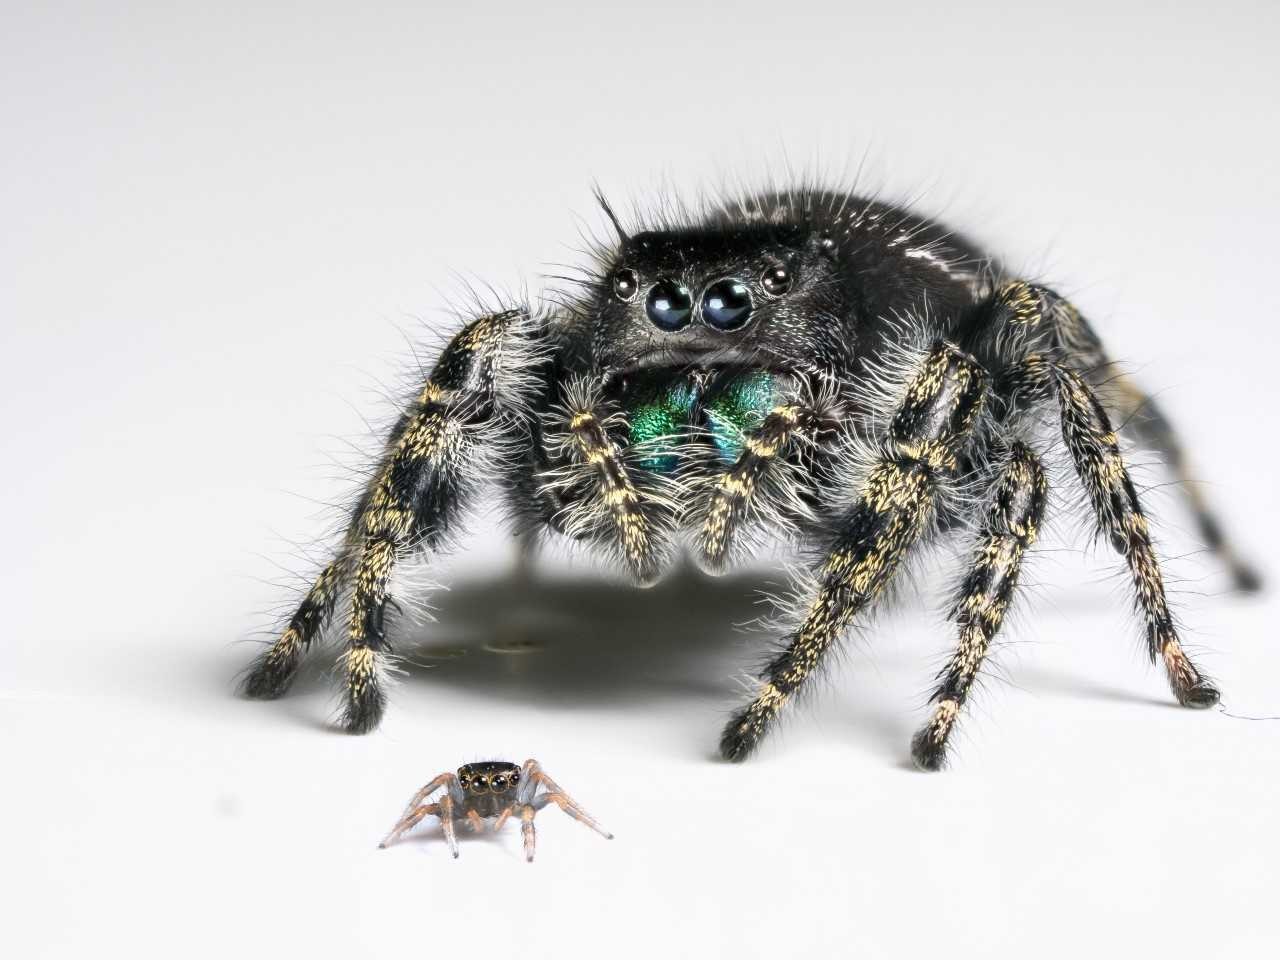 A baby jumping spider is a miniature carbon copy of an adult against a white backdrop.